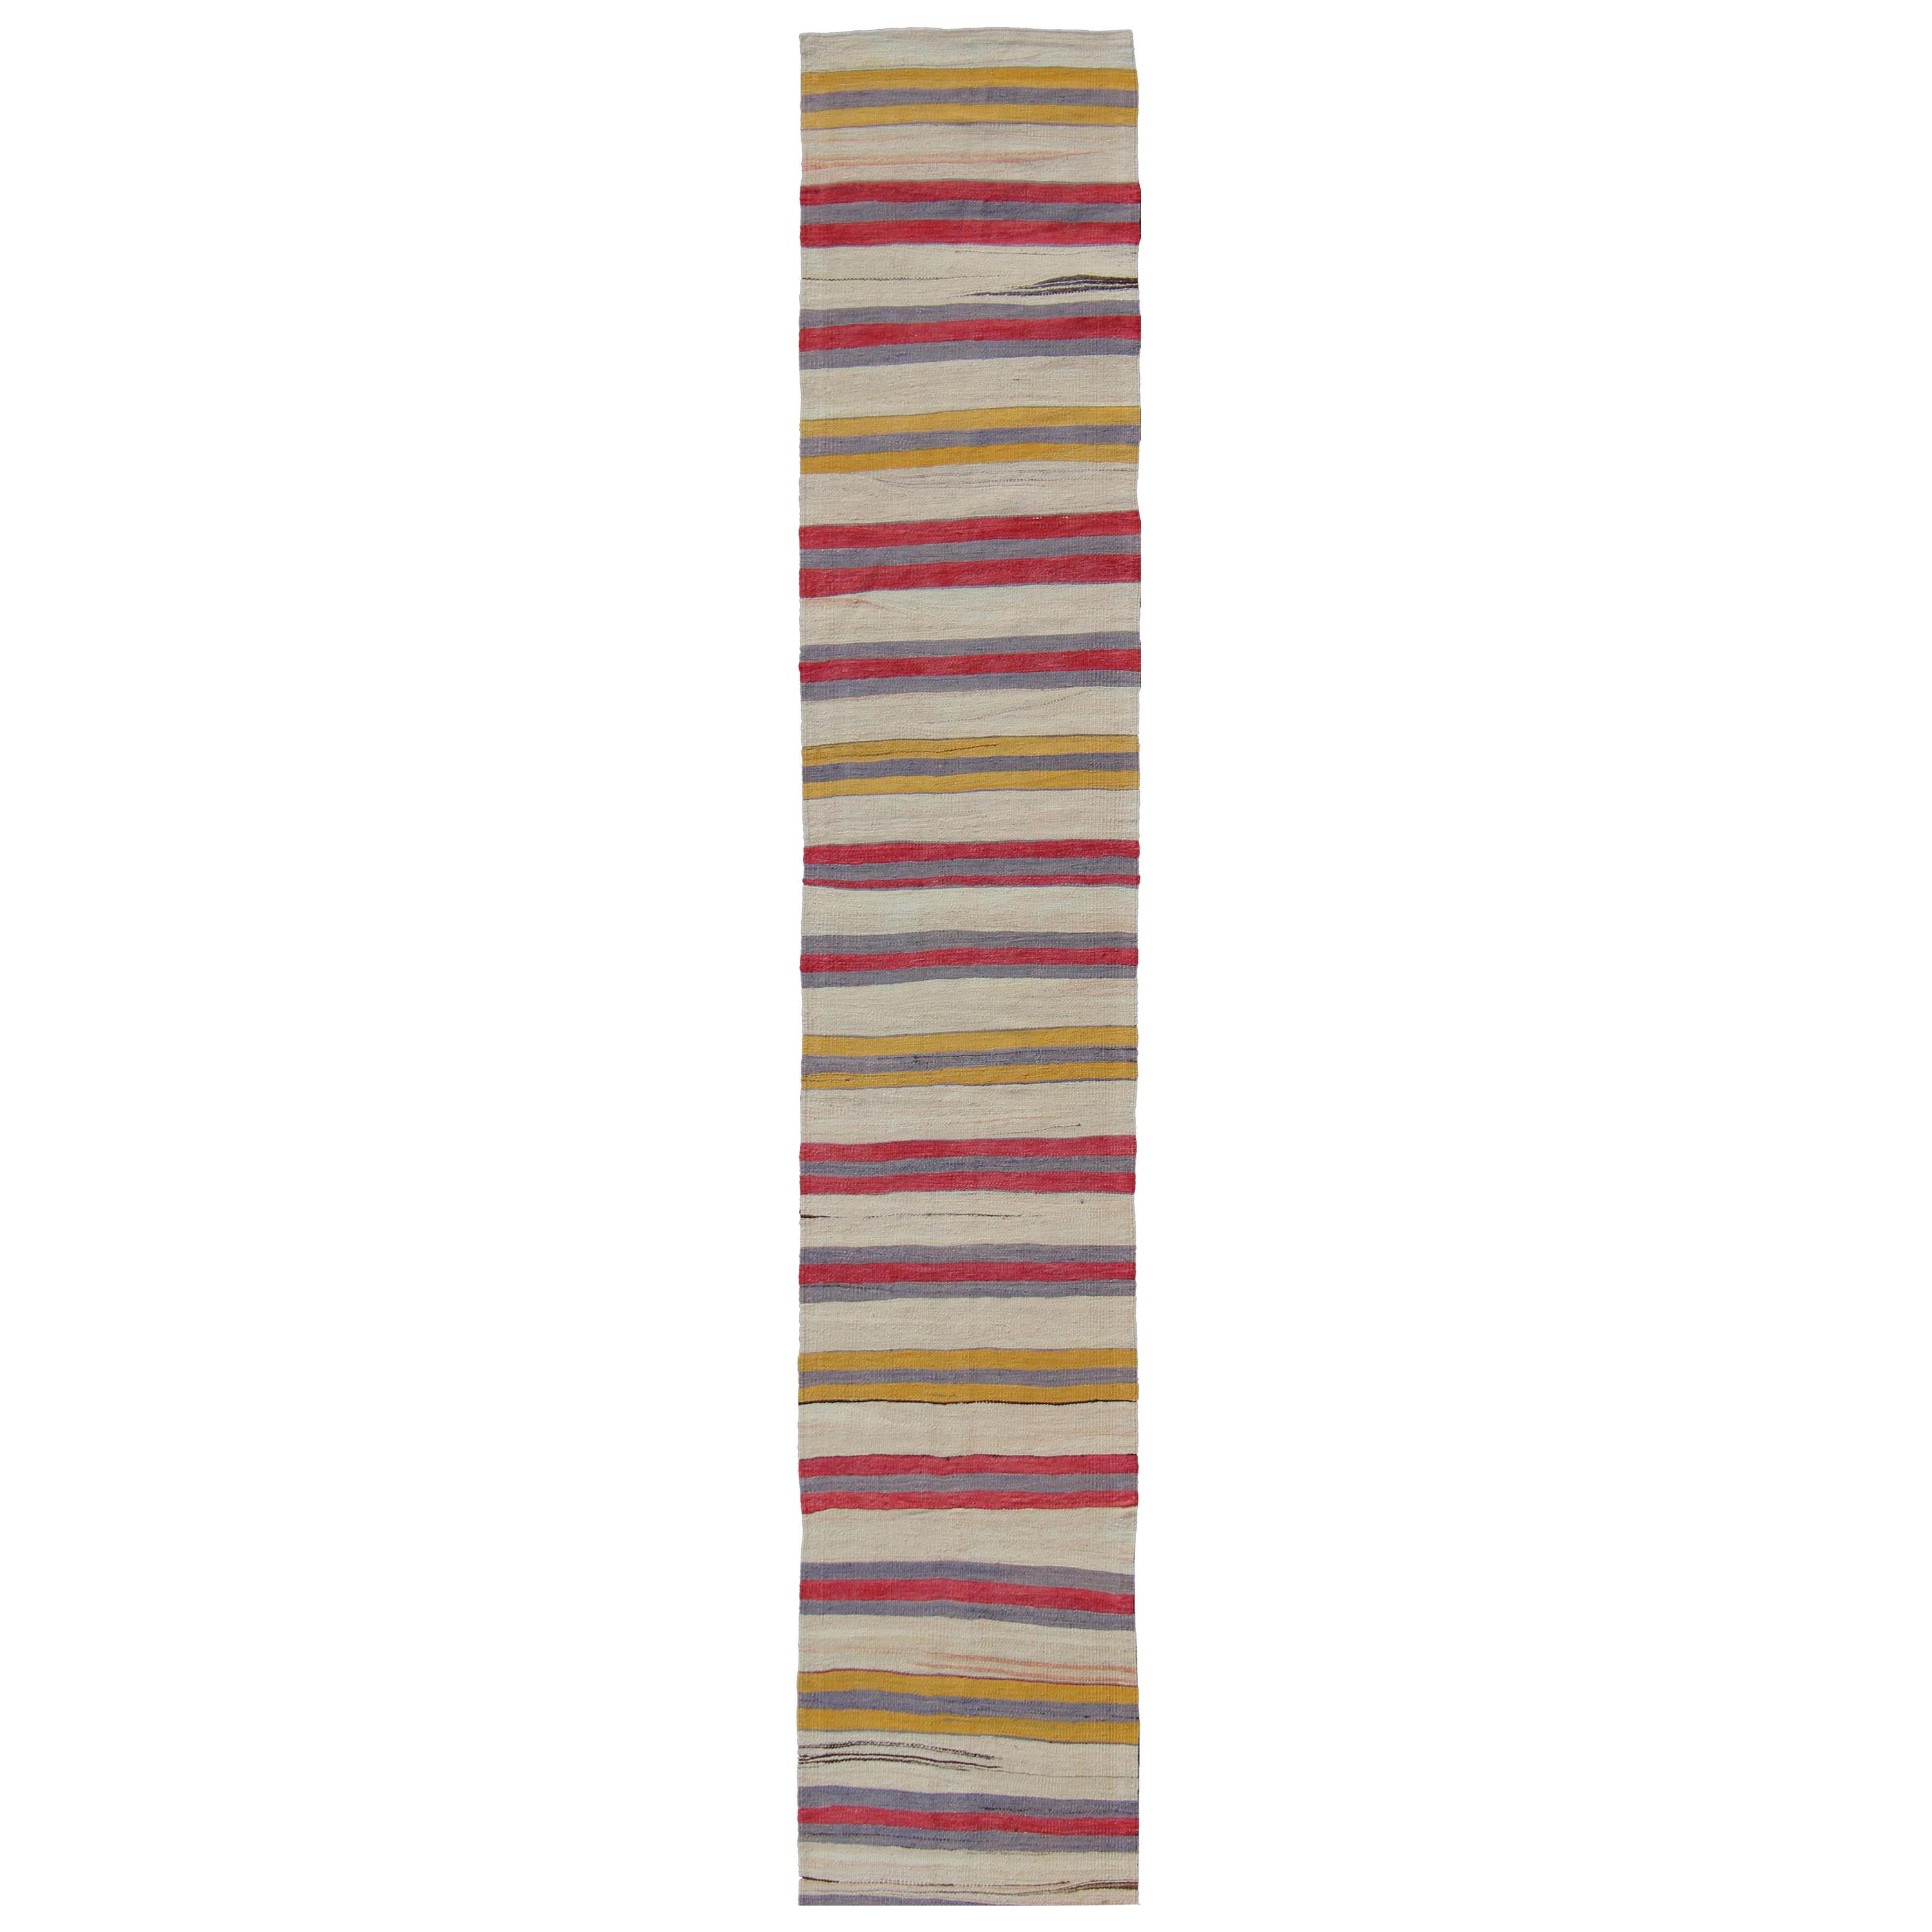 Very Long Colorful Vintage Turkish Flat-Weave Runner with Dynamic Stripe Design